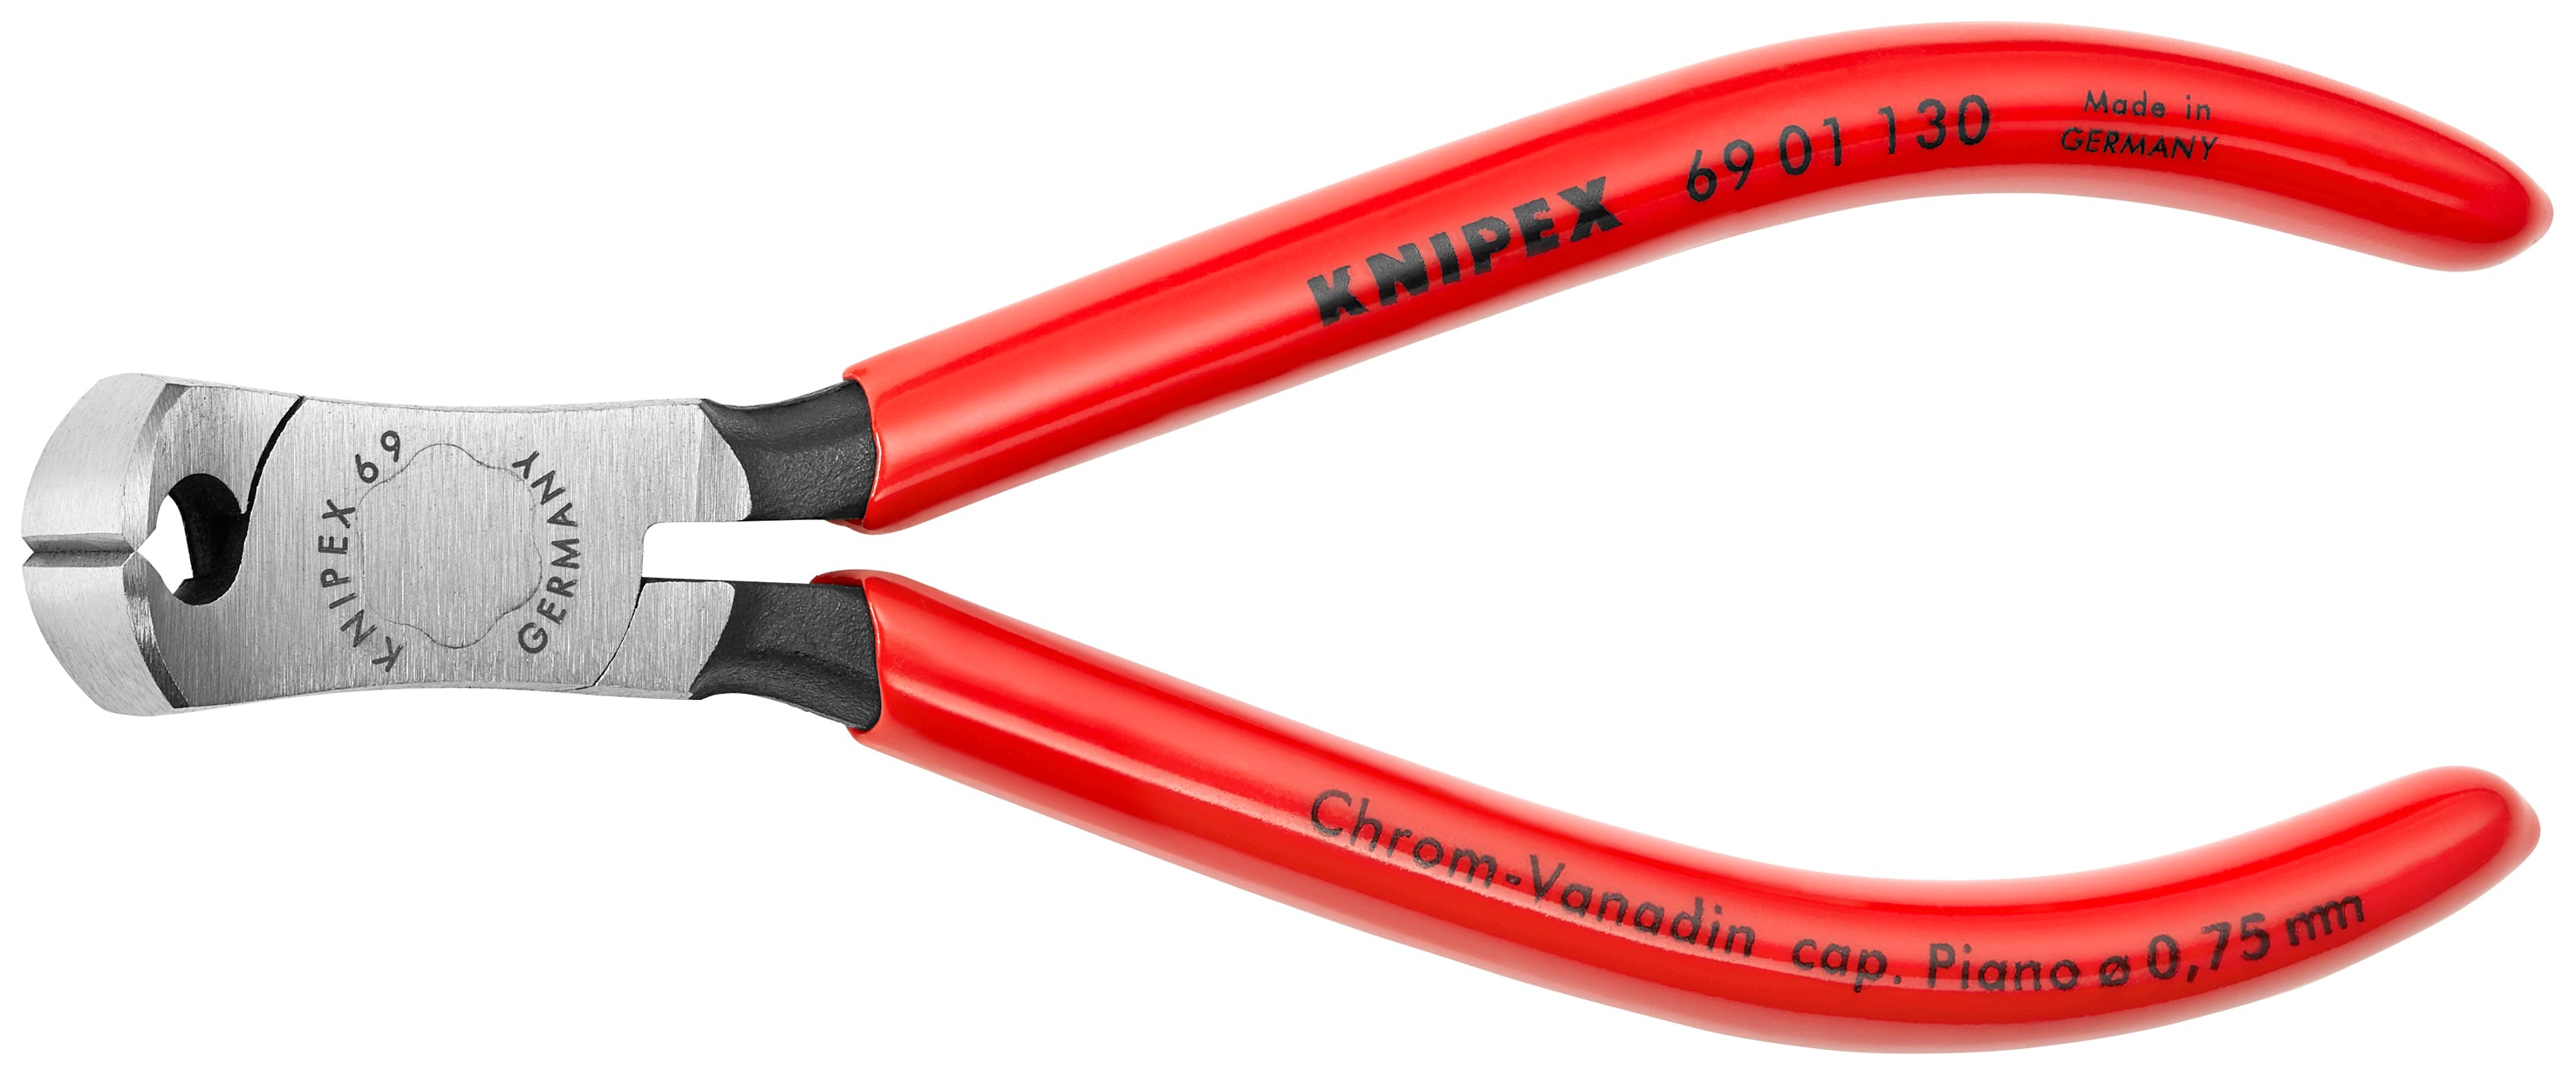 Knipex 6901130-5 1/4" End Cutting Nippers